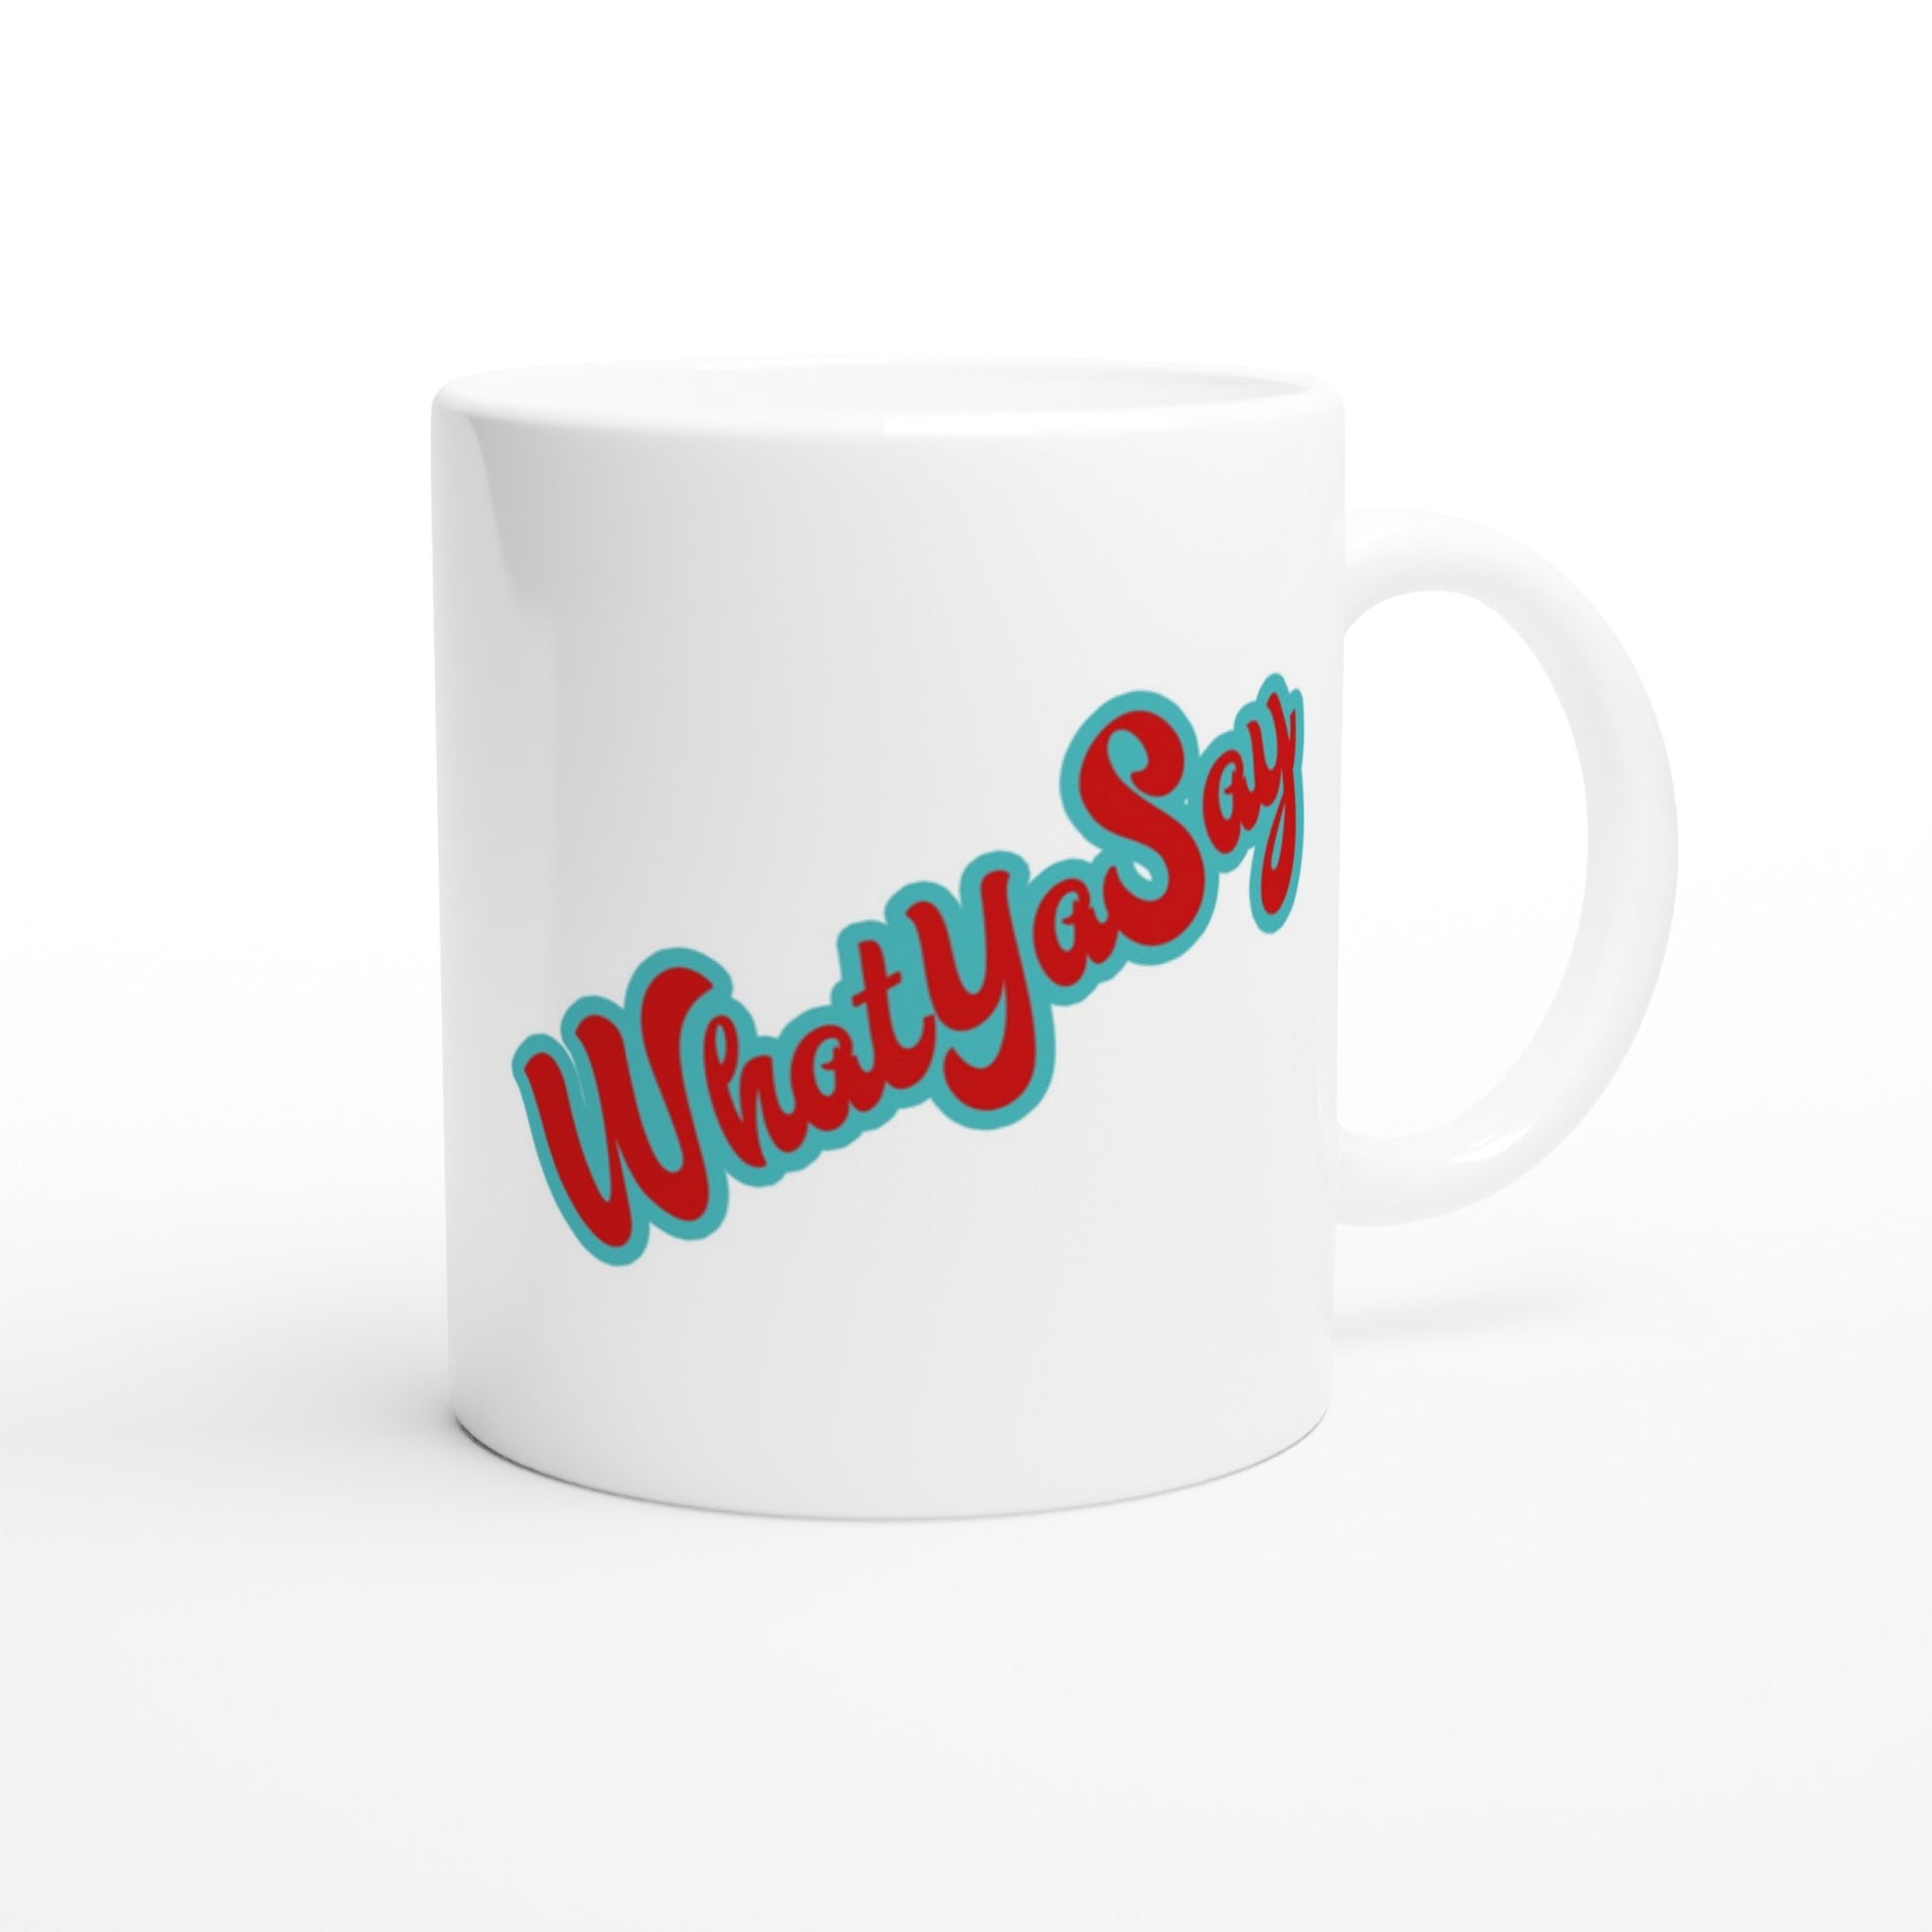 White ceramic 11oz mug with motto I Got 99 Problems But a Margarita Aint One on front and WhatYa Say logo on back coffee mug dishwasher and microwave safe from WhatYa Say Apparel back  view.